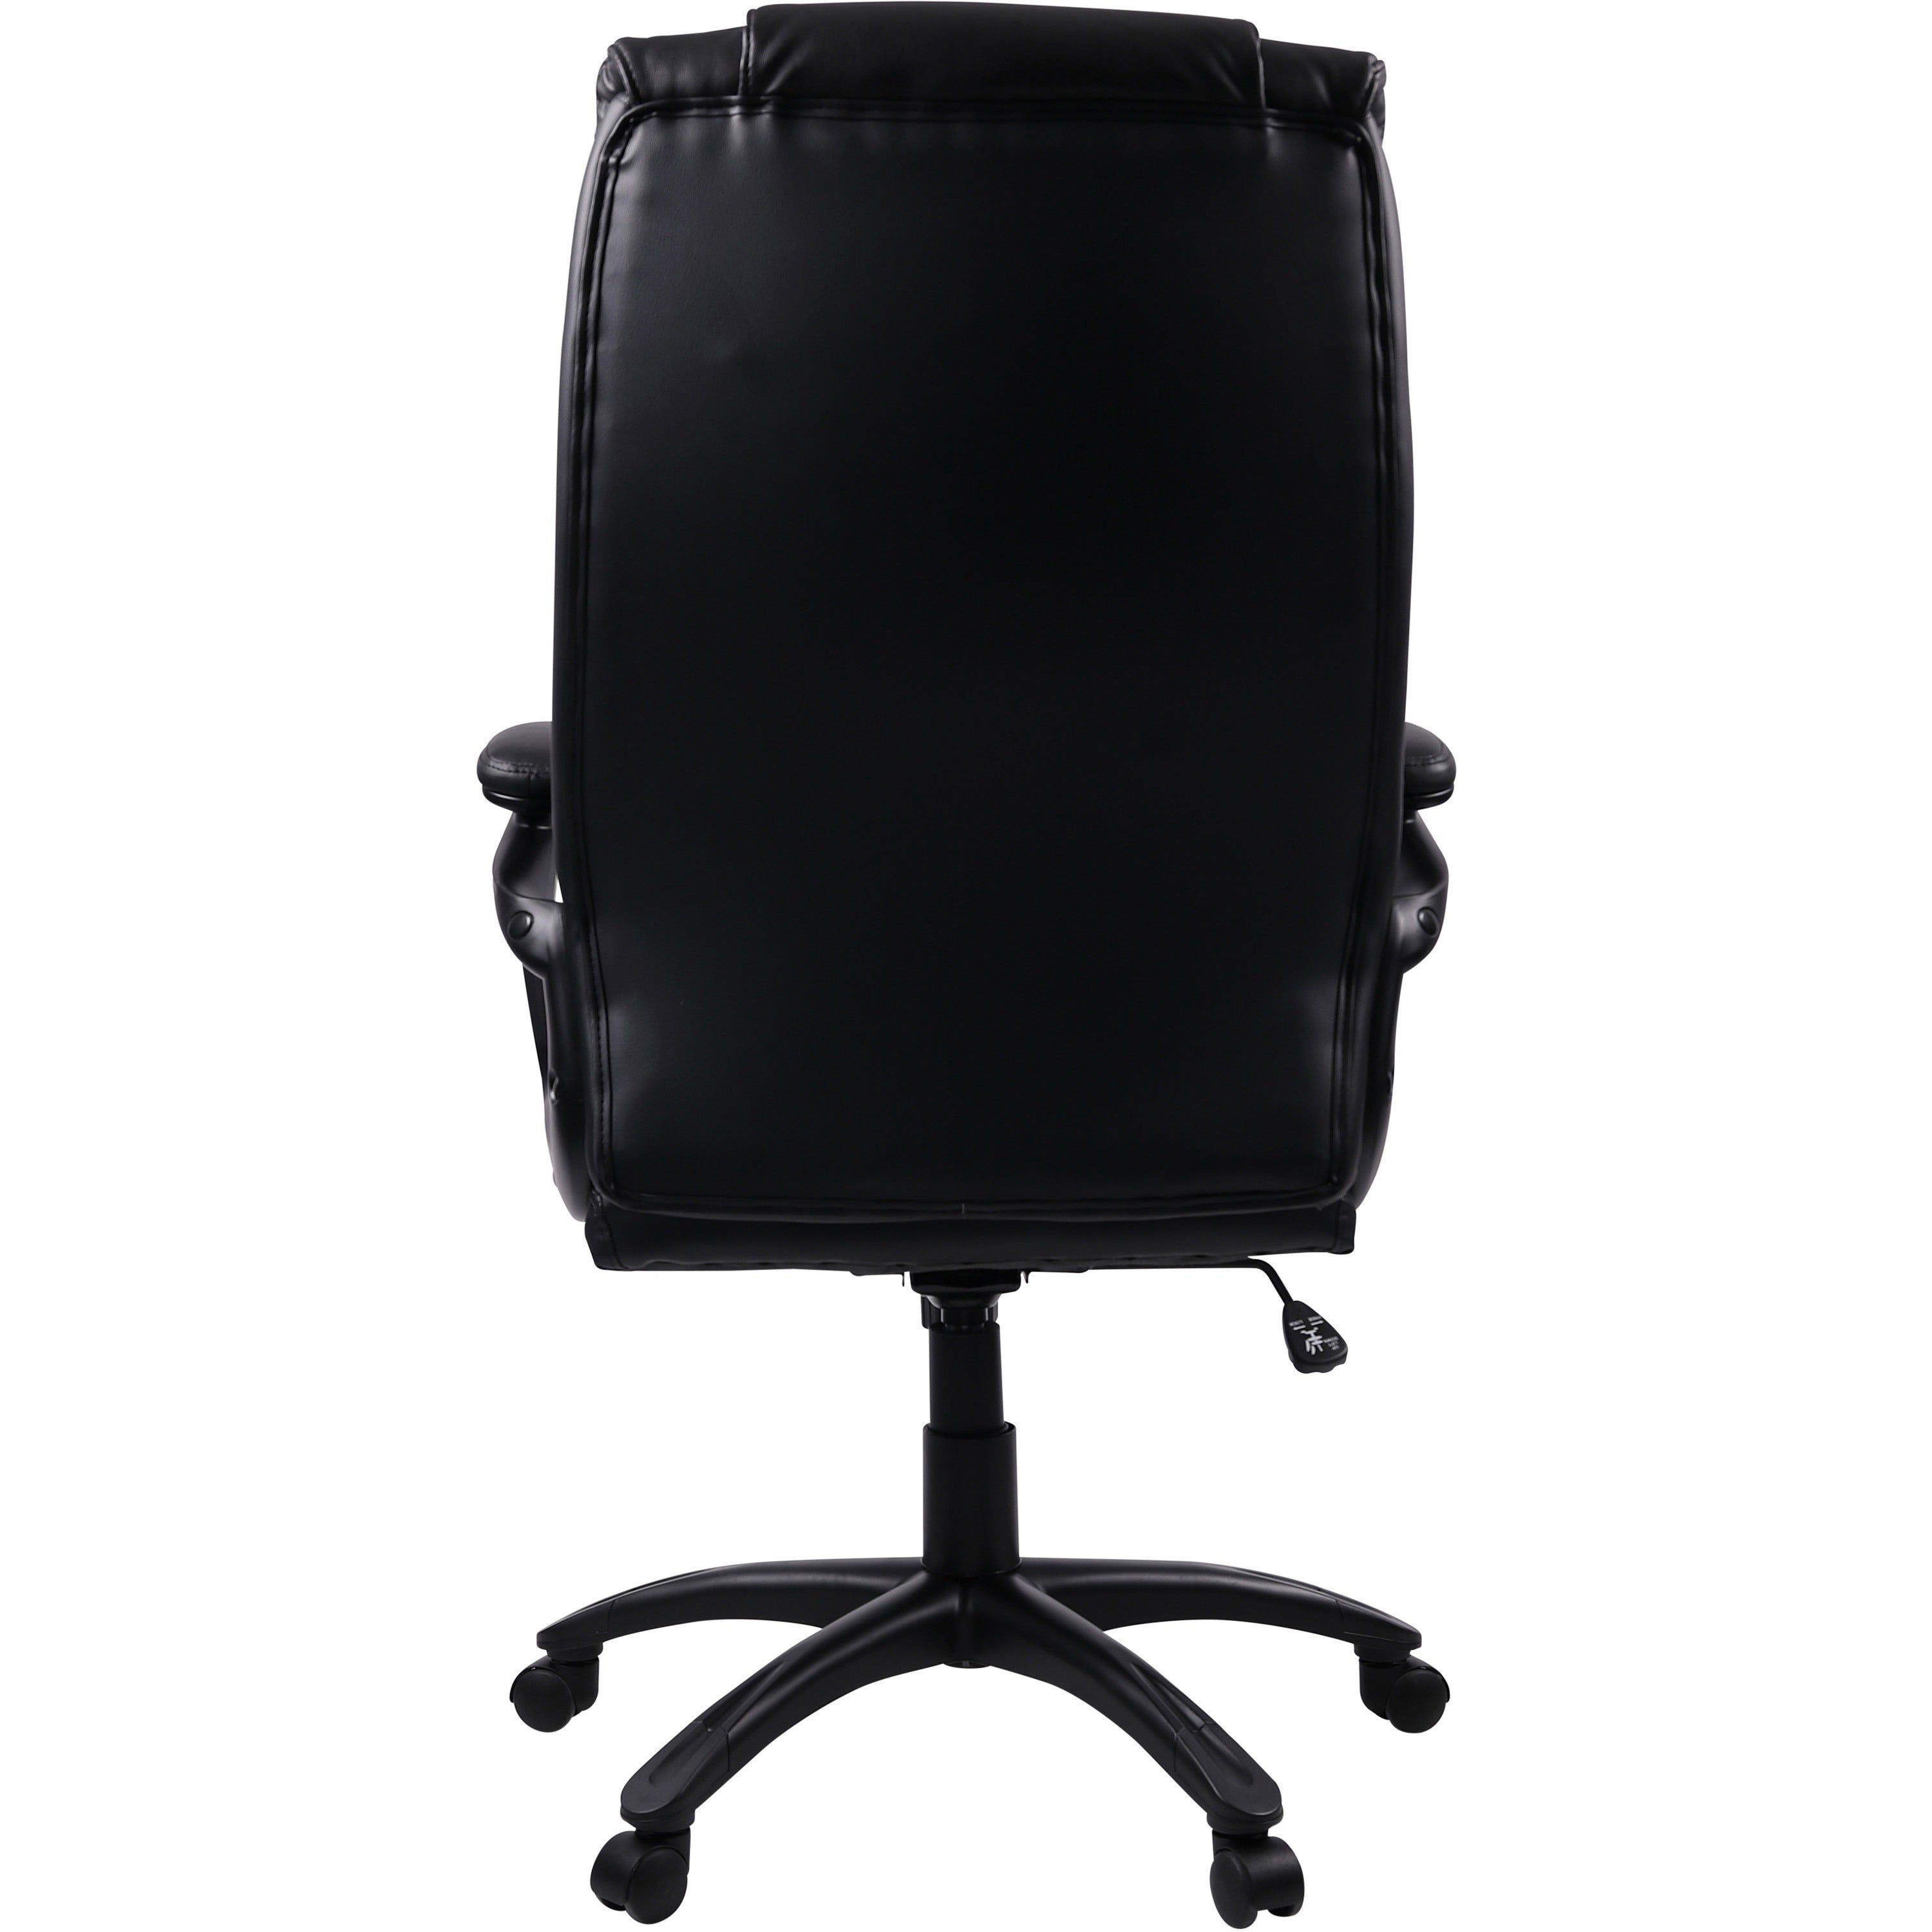 Lorell High-back Cushioned Office Chair - Bonded Leather Seat - Bonded Leather Back - High Back - 5-star Base - Black - 1 Each - 